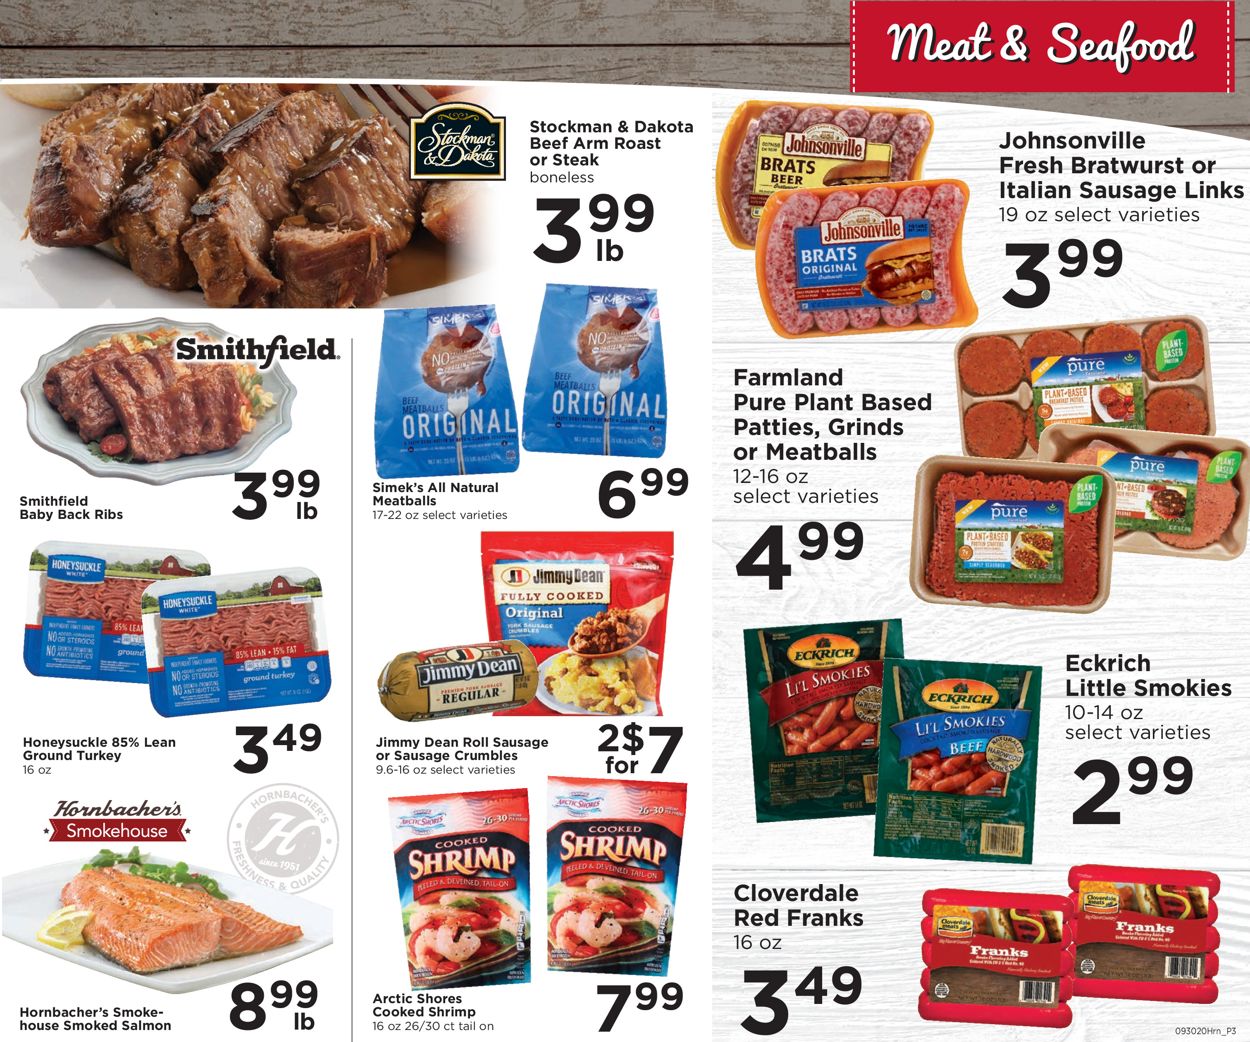 Hornbacher's Weekly Ad Circular - valid 09/30-10/06/2020 (Page 3)